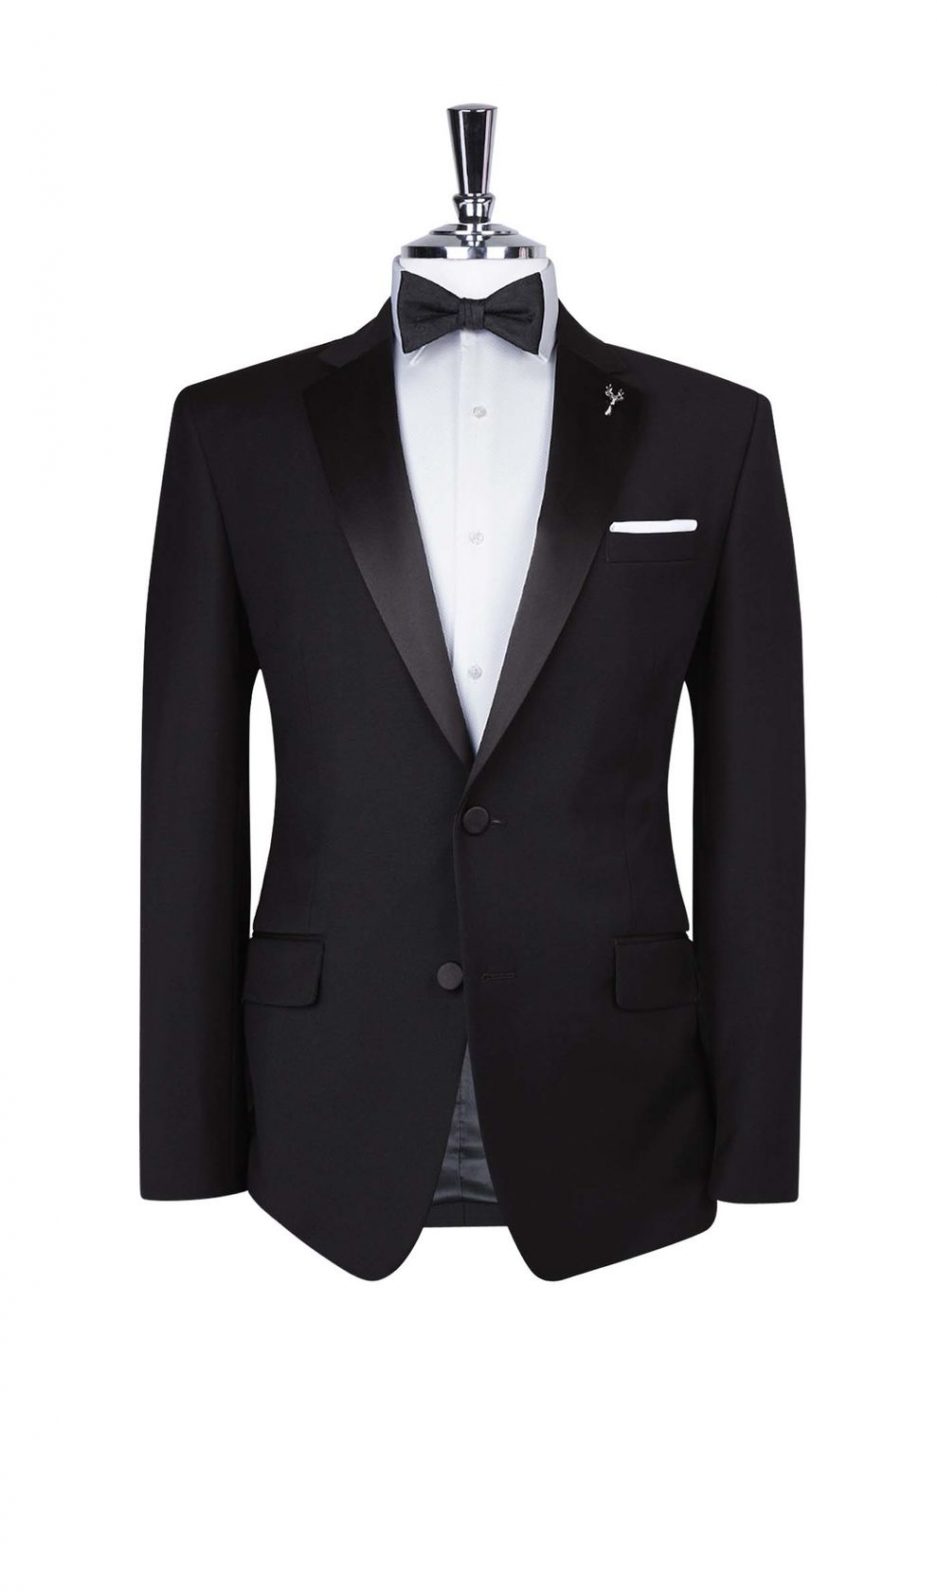 mens suit, mens wear, black, design, latest.style, shop, online shopping in lagos